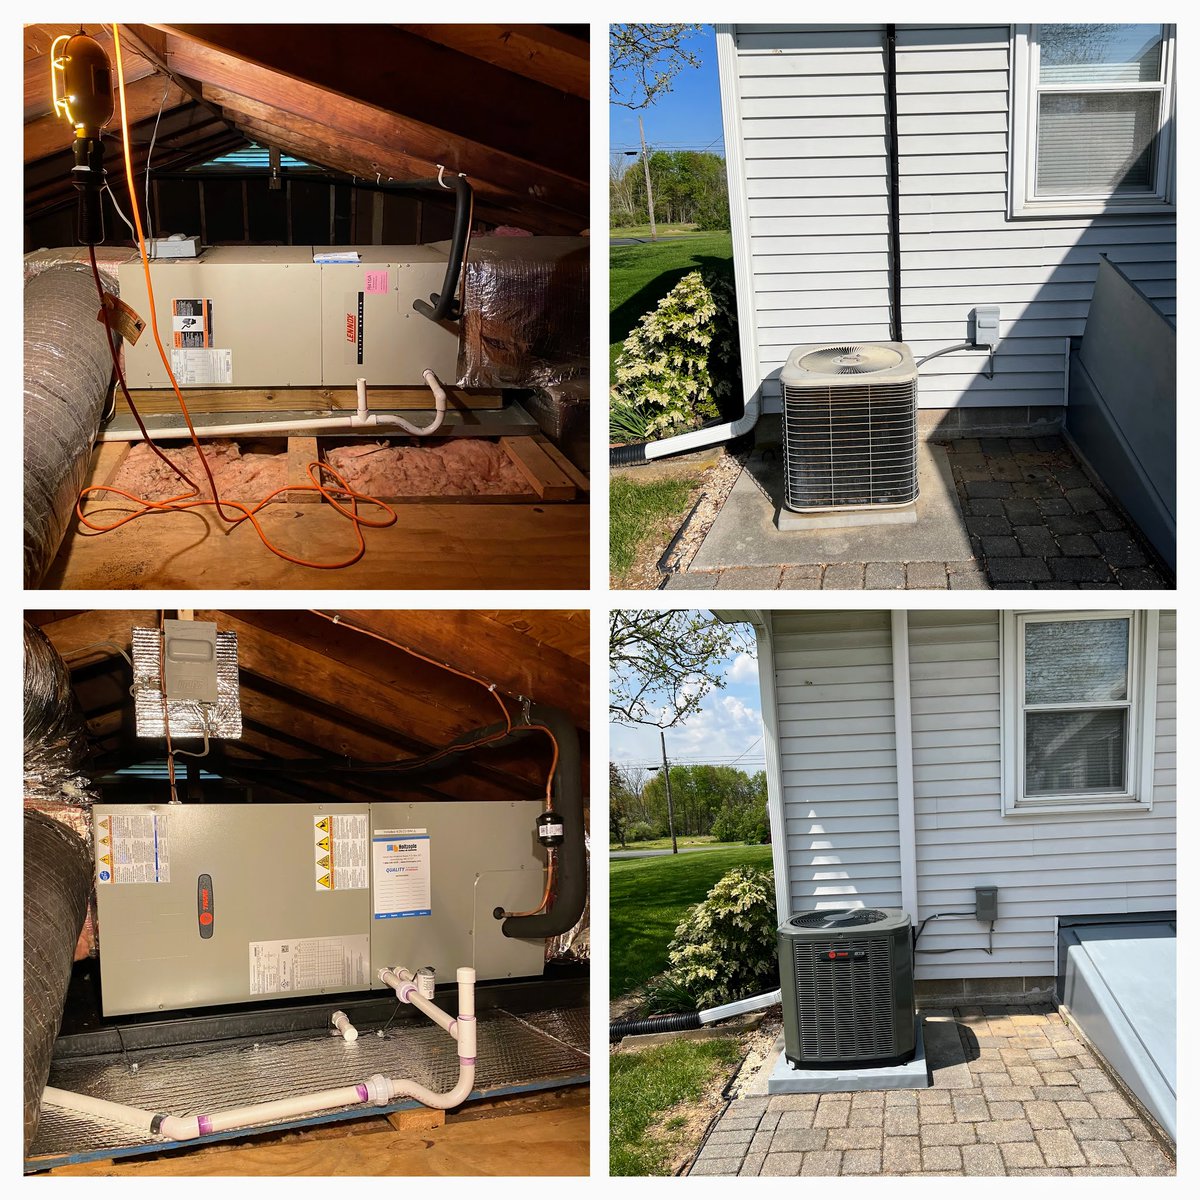 We want to congratulate this week's #JobOfTheWeek winners, Brett & Jordan. Our new client in Gettysburg, PA, replaced their old system with a new Trane system. Keeping our new clients cool in the upcoming summer heat will be no problem thanks to the quality work from our crew!